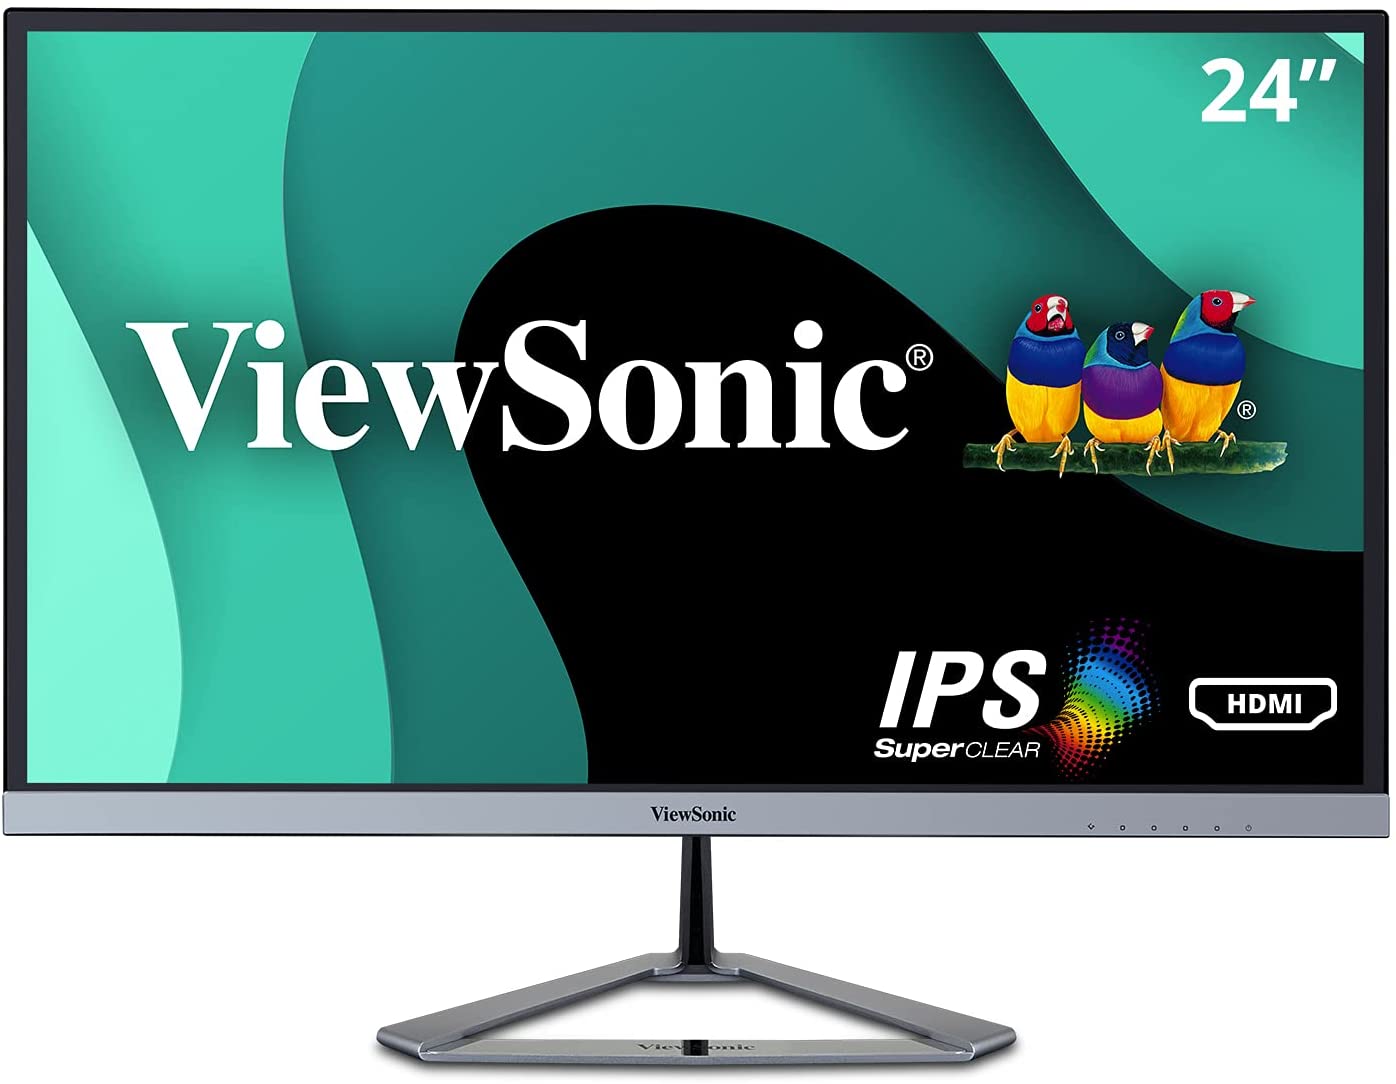 The ViewSonic VX2476-SMHD monitor in front of a white background.